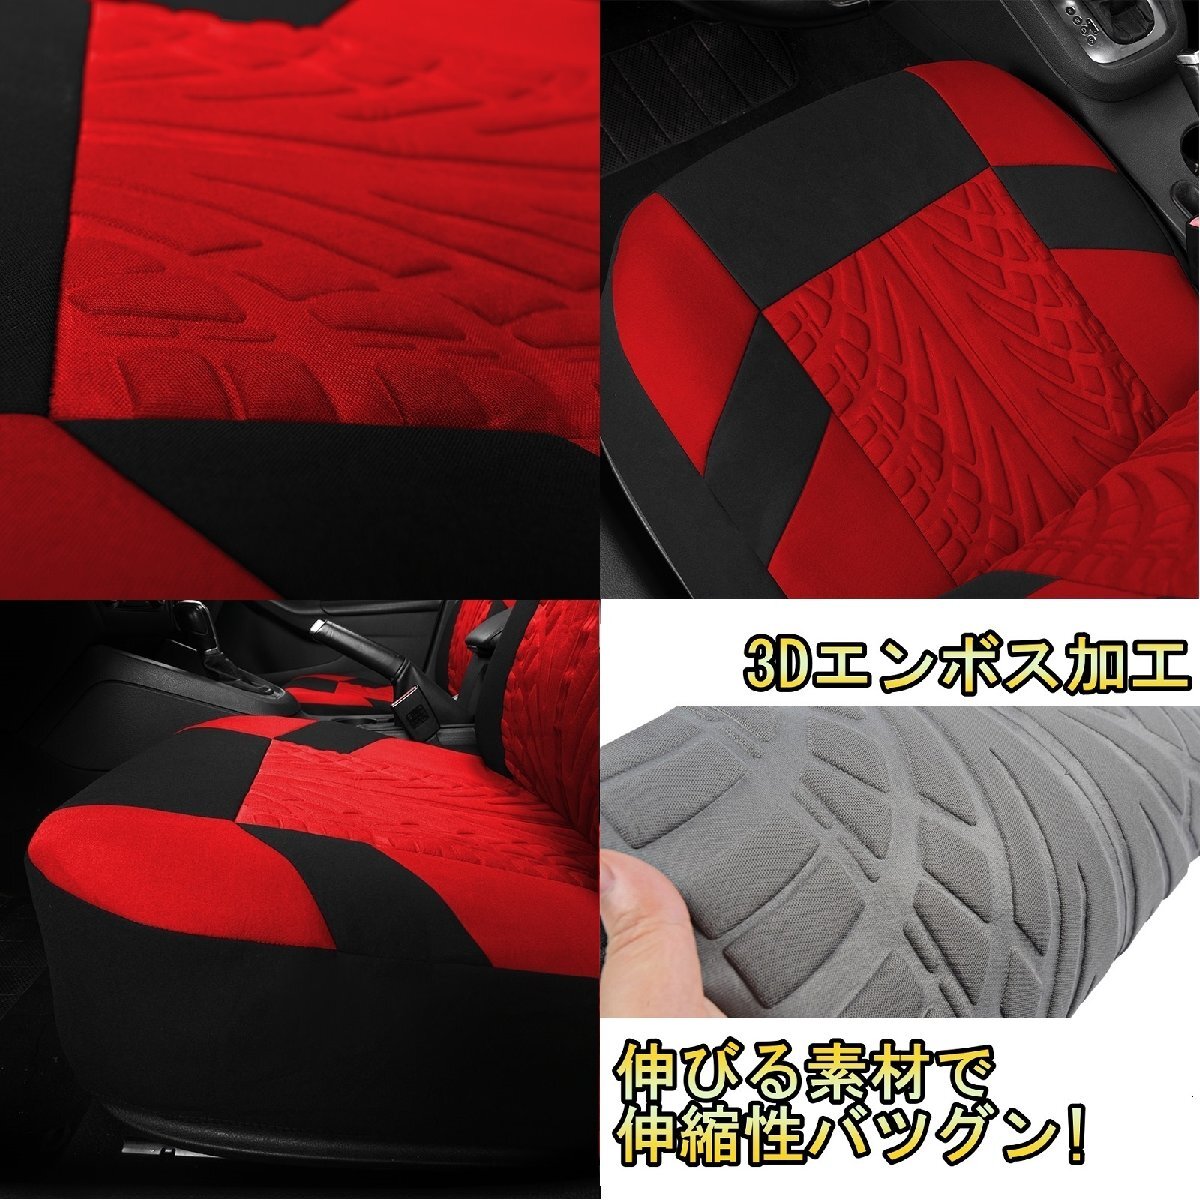  seat cover car Audi A3 8PB driver`s seat passenger's seat after part seat 2 row set is possible to choose 6 color AUTOYOUTH